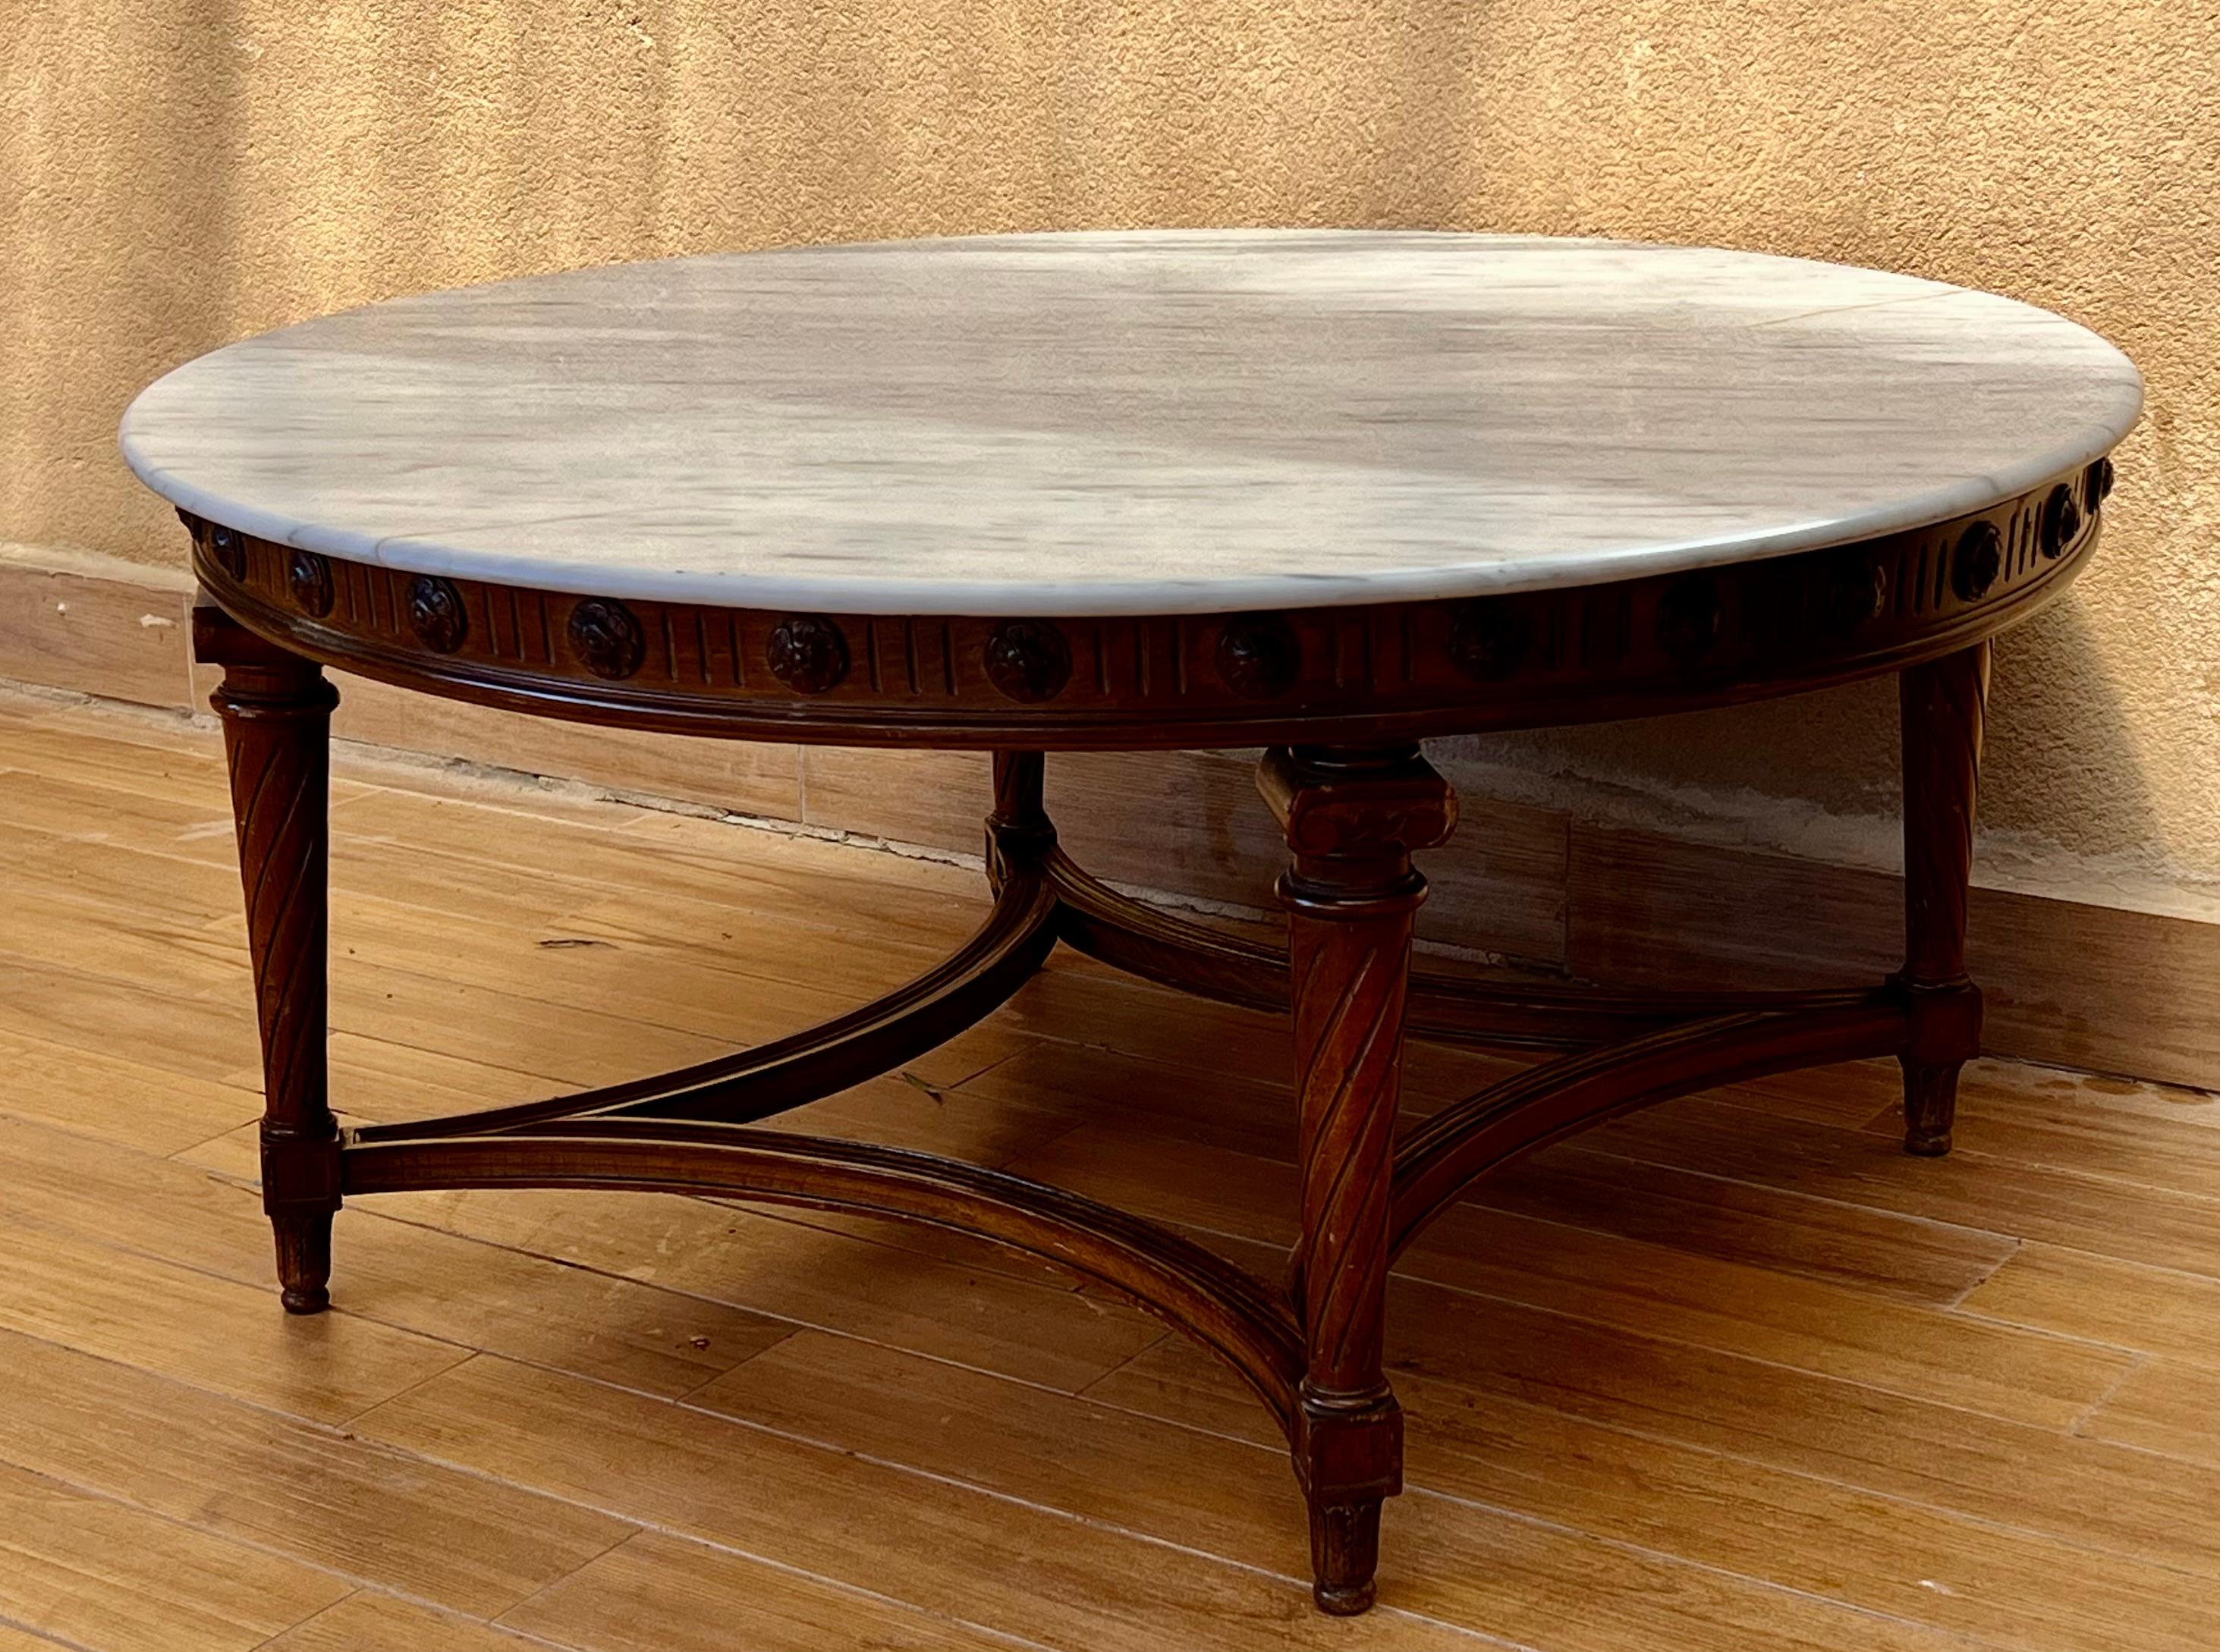 Spanish Colonial 20th Round Coffee Table with Marble Top and Carved Legs